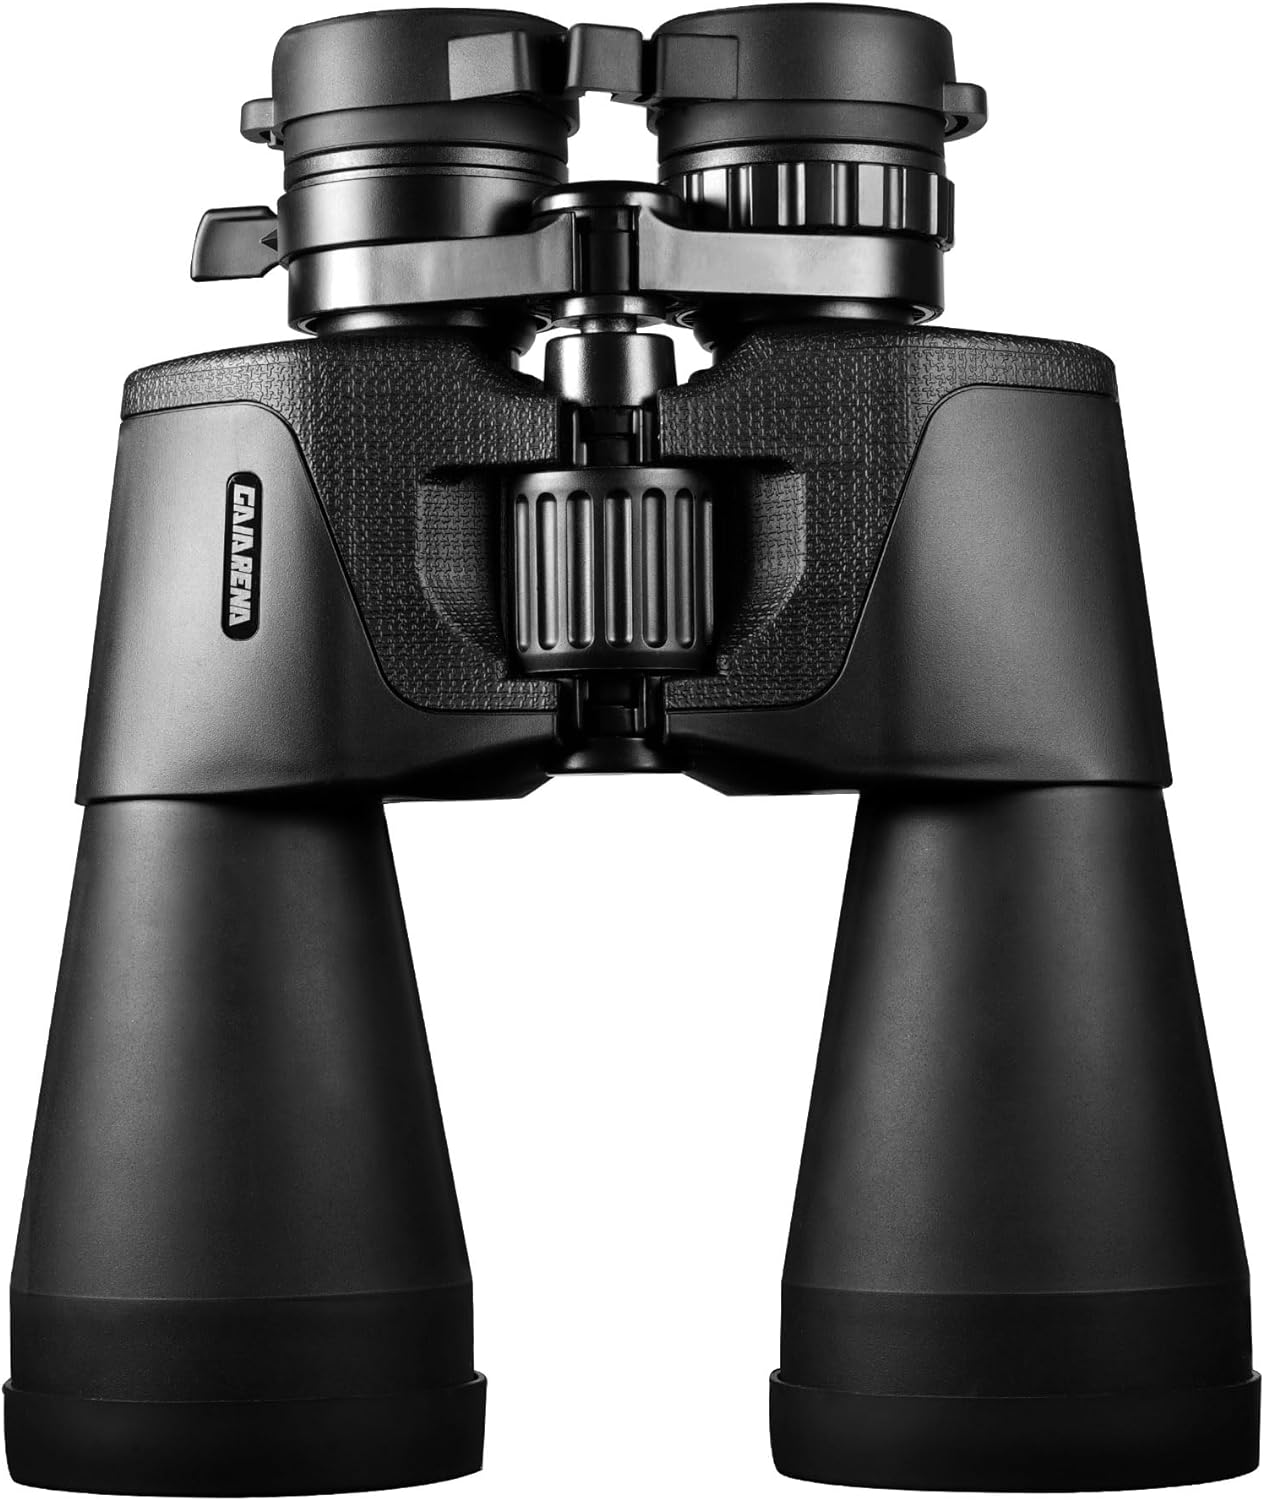 GAIARENA Zoom Binoculars 10-25x60 for Professional Adults with Fully Broadband Multi-Coated Lens, All BAK-4 Prism, Real Magnification, Innovated Unique Optics System Bino Scope for Hunting  Hiking